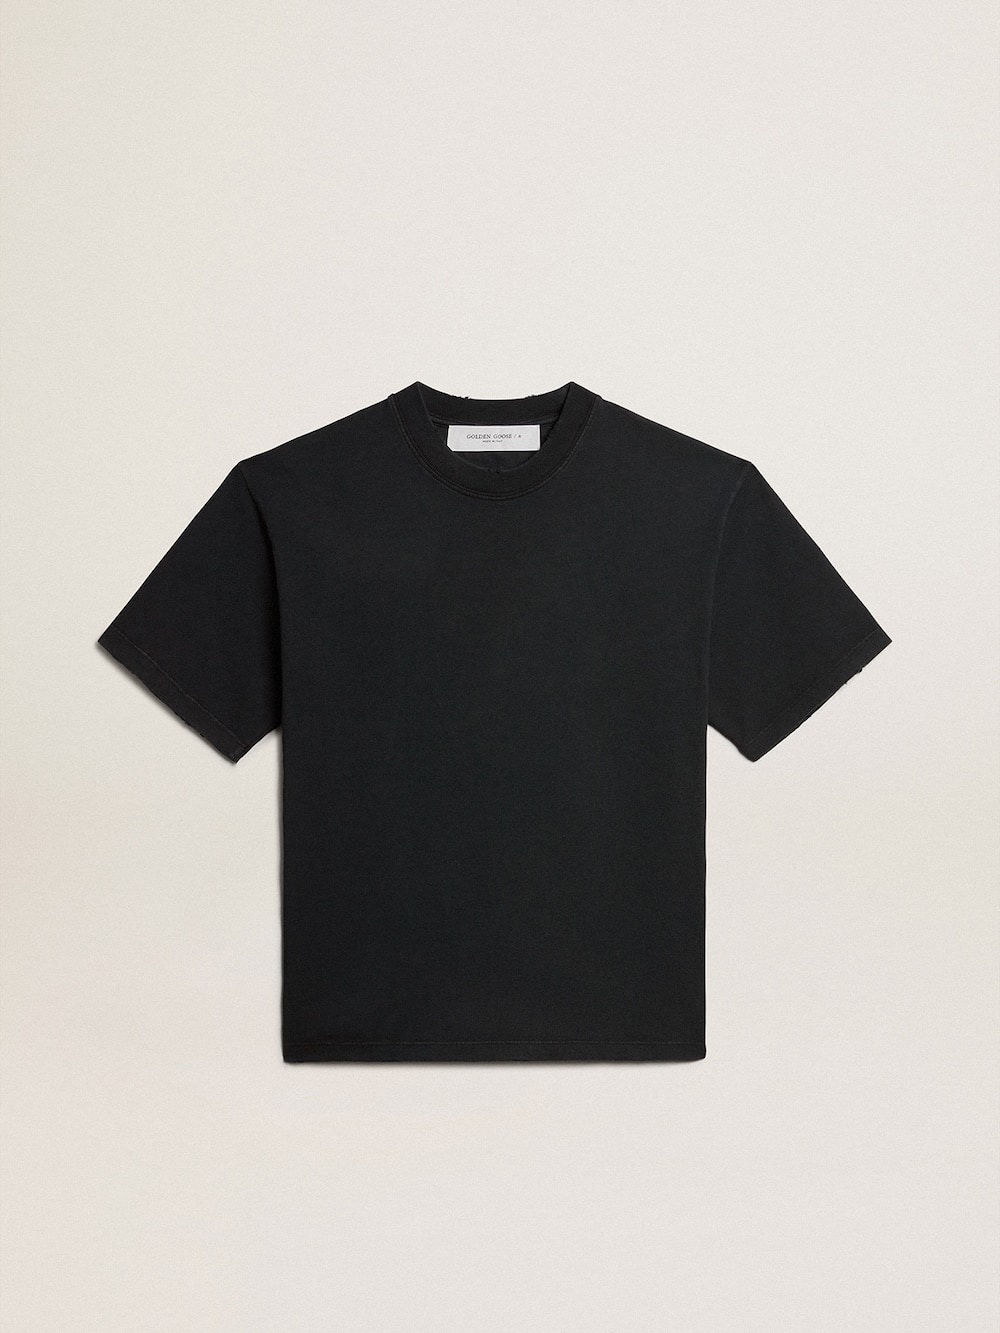 Golden Goose - T-shirt in washed black with reverse logo on the back - Boxy fit in 